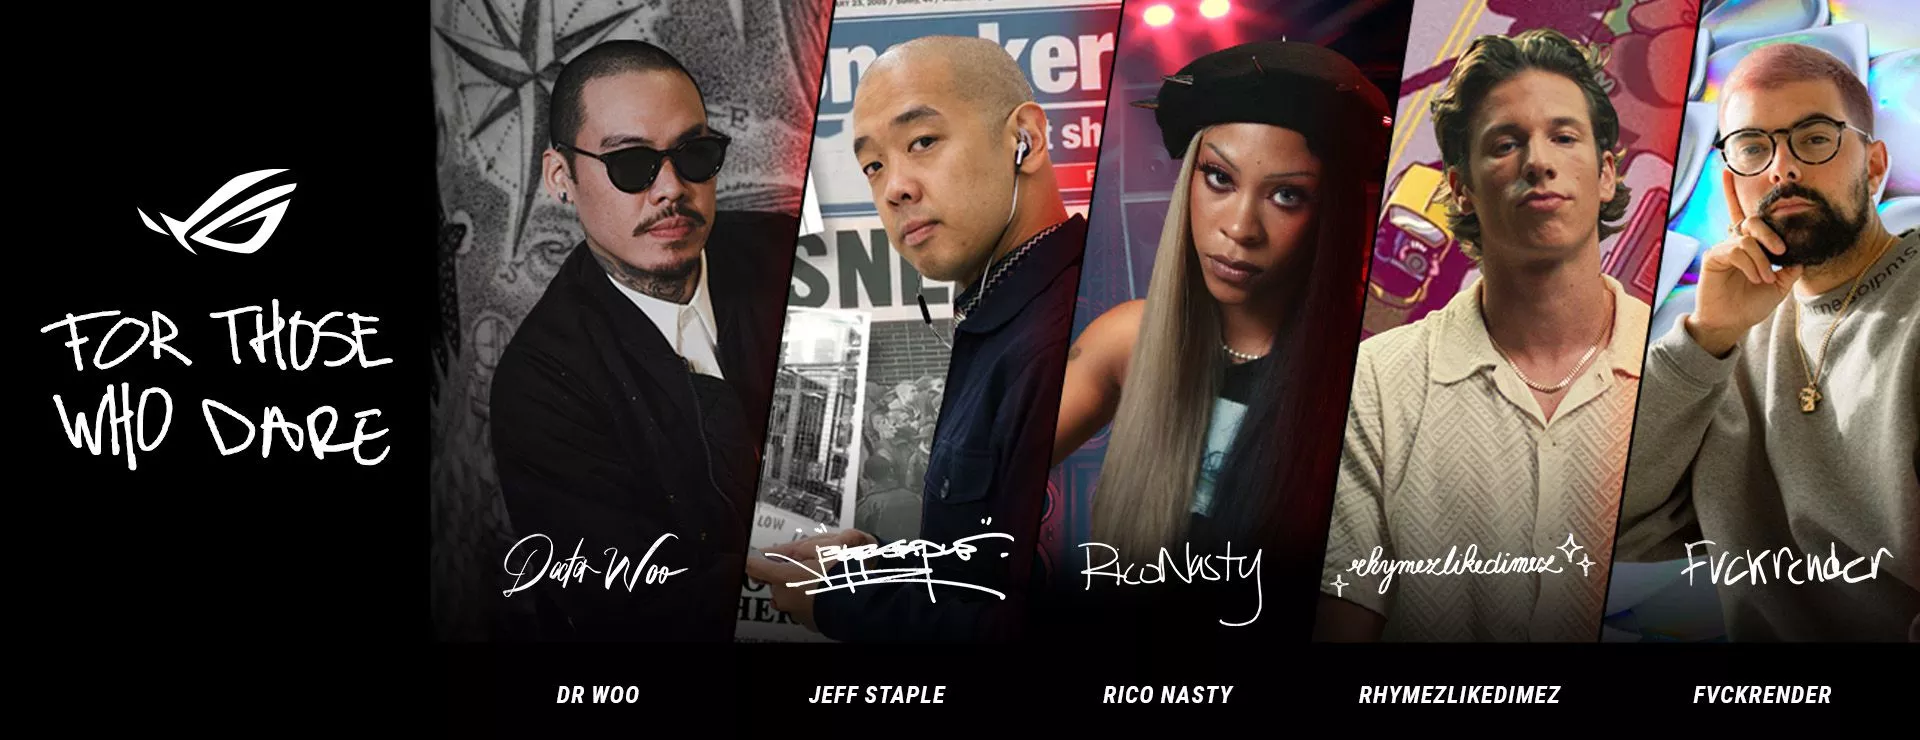 For Those Who Dare Dr.  Woo Jeff Staple Rico Nasty Rhymezlikedimez Fvckrender